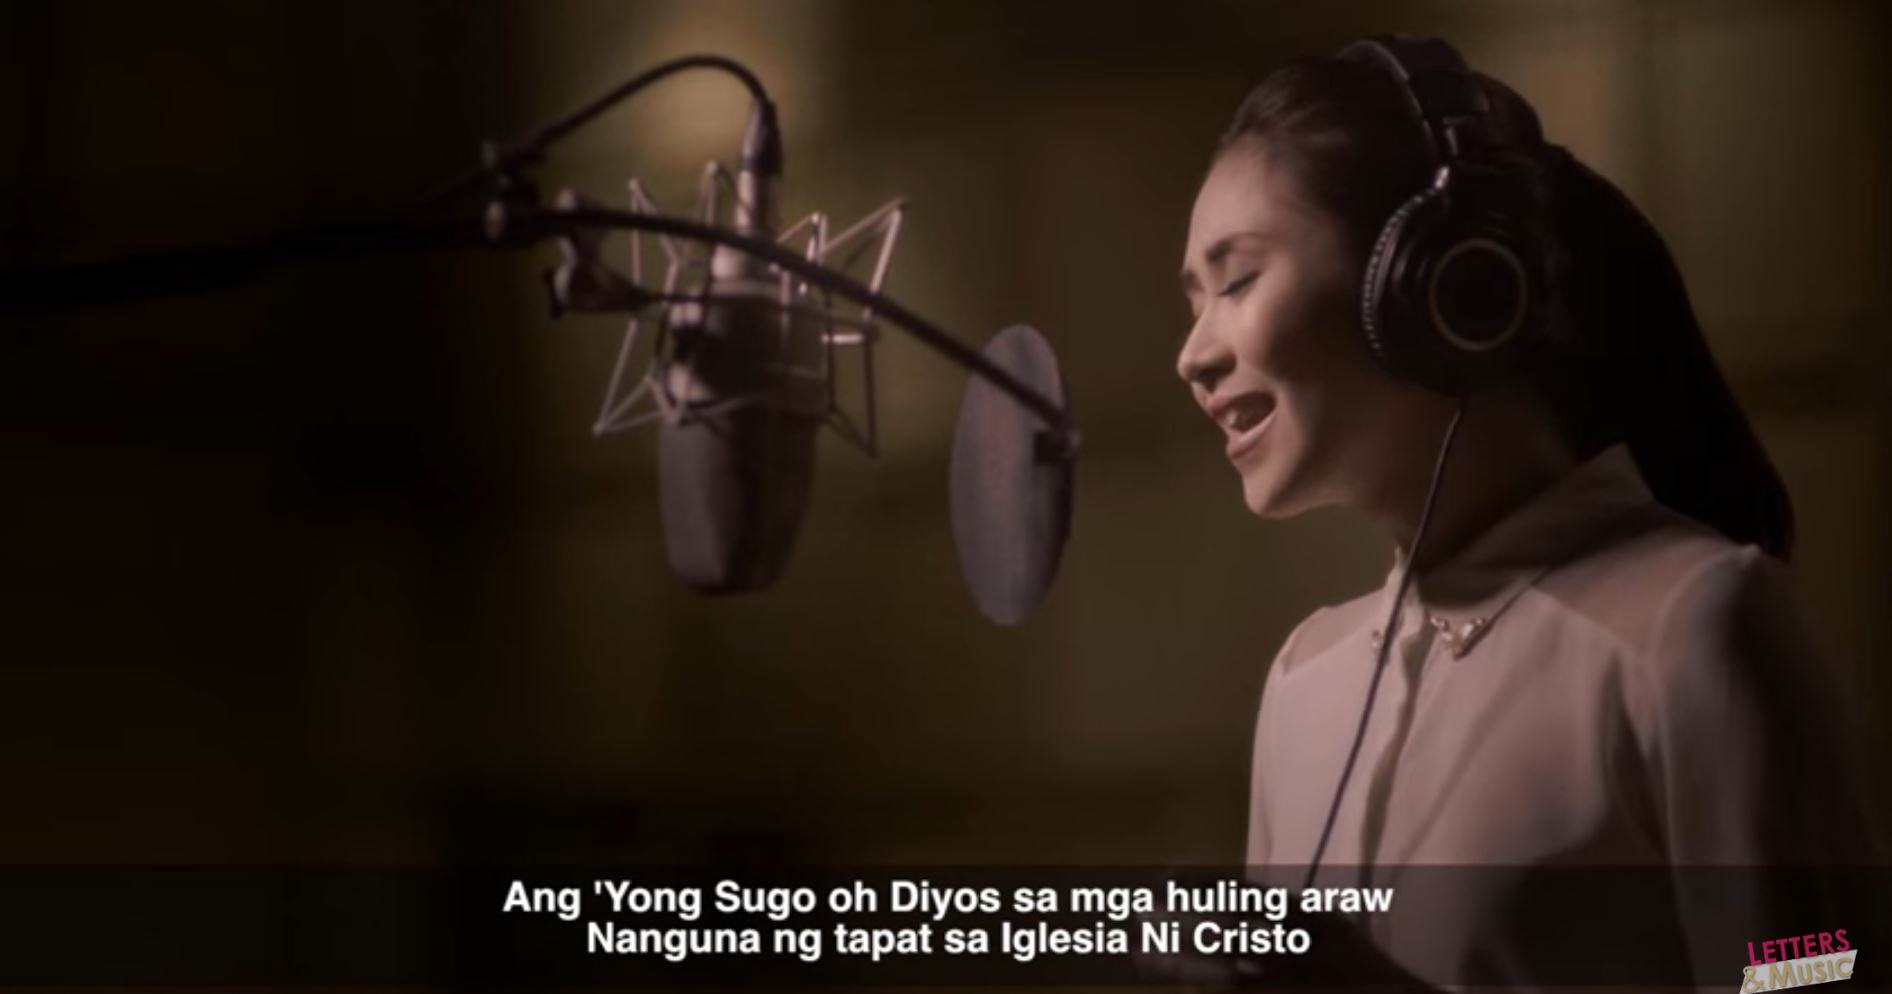 "Ang Sugo ng Diyos sa mga Huling Araw," theme song of the historical biographical film, "Felix Manalo" also won as Best Theme Song in the 64th FAMAS awards held Sunday night (December 4). The movie's theme song was sung by singer-actress Sarah Geronimo. (Eagle News Service)